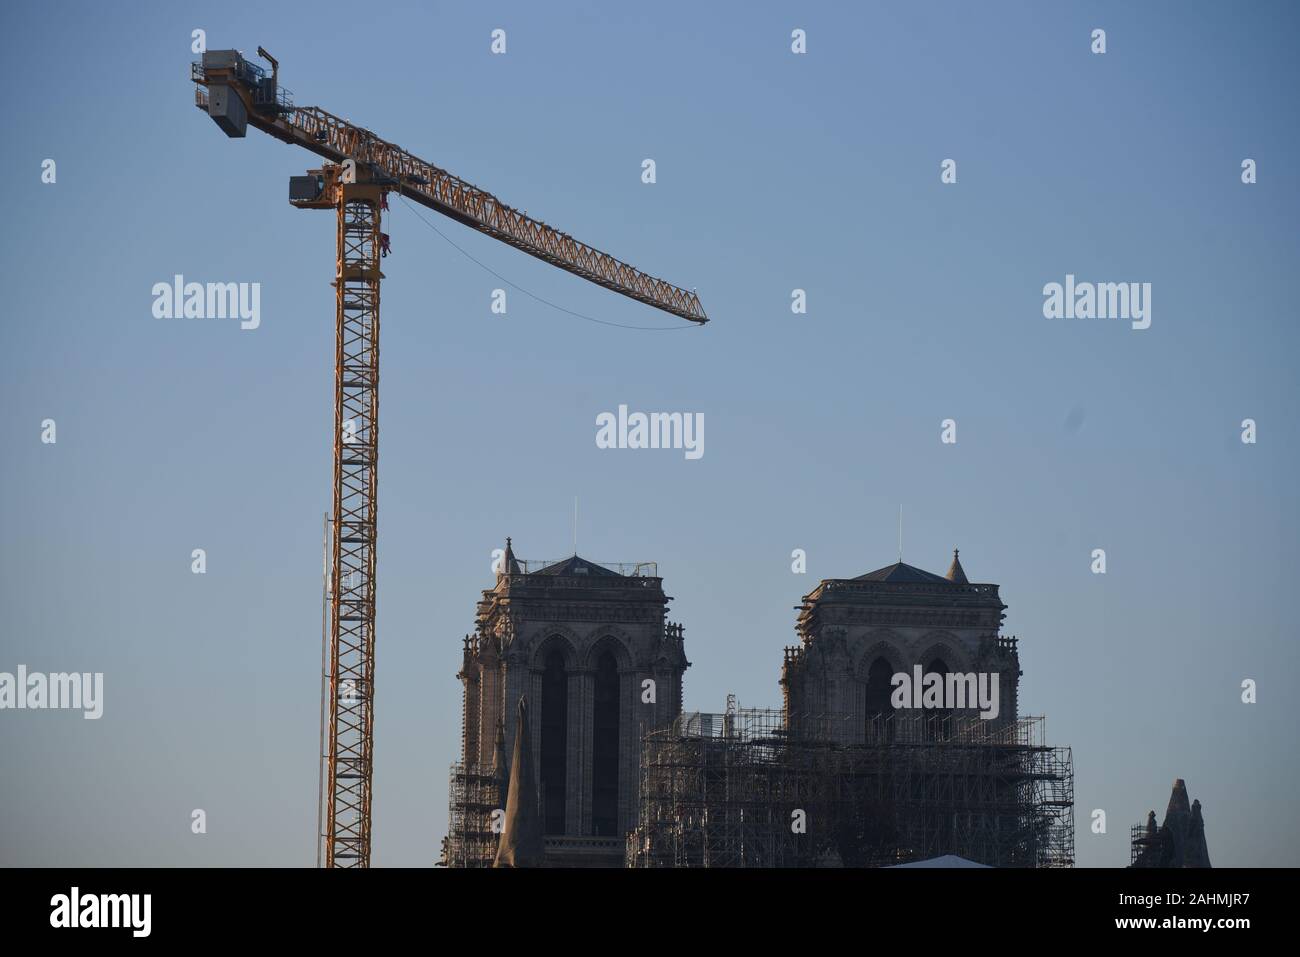 *** STRICTLY NO SALES TO FRENCH MEDIA OR PUBLISHERS *** December 30, 2019 - Paris, France: A giant crane has been erected near Notre Dame cathedral in order to dismantle the old scaffolding structure that collapsed during the April 15 fire. Stock Photo